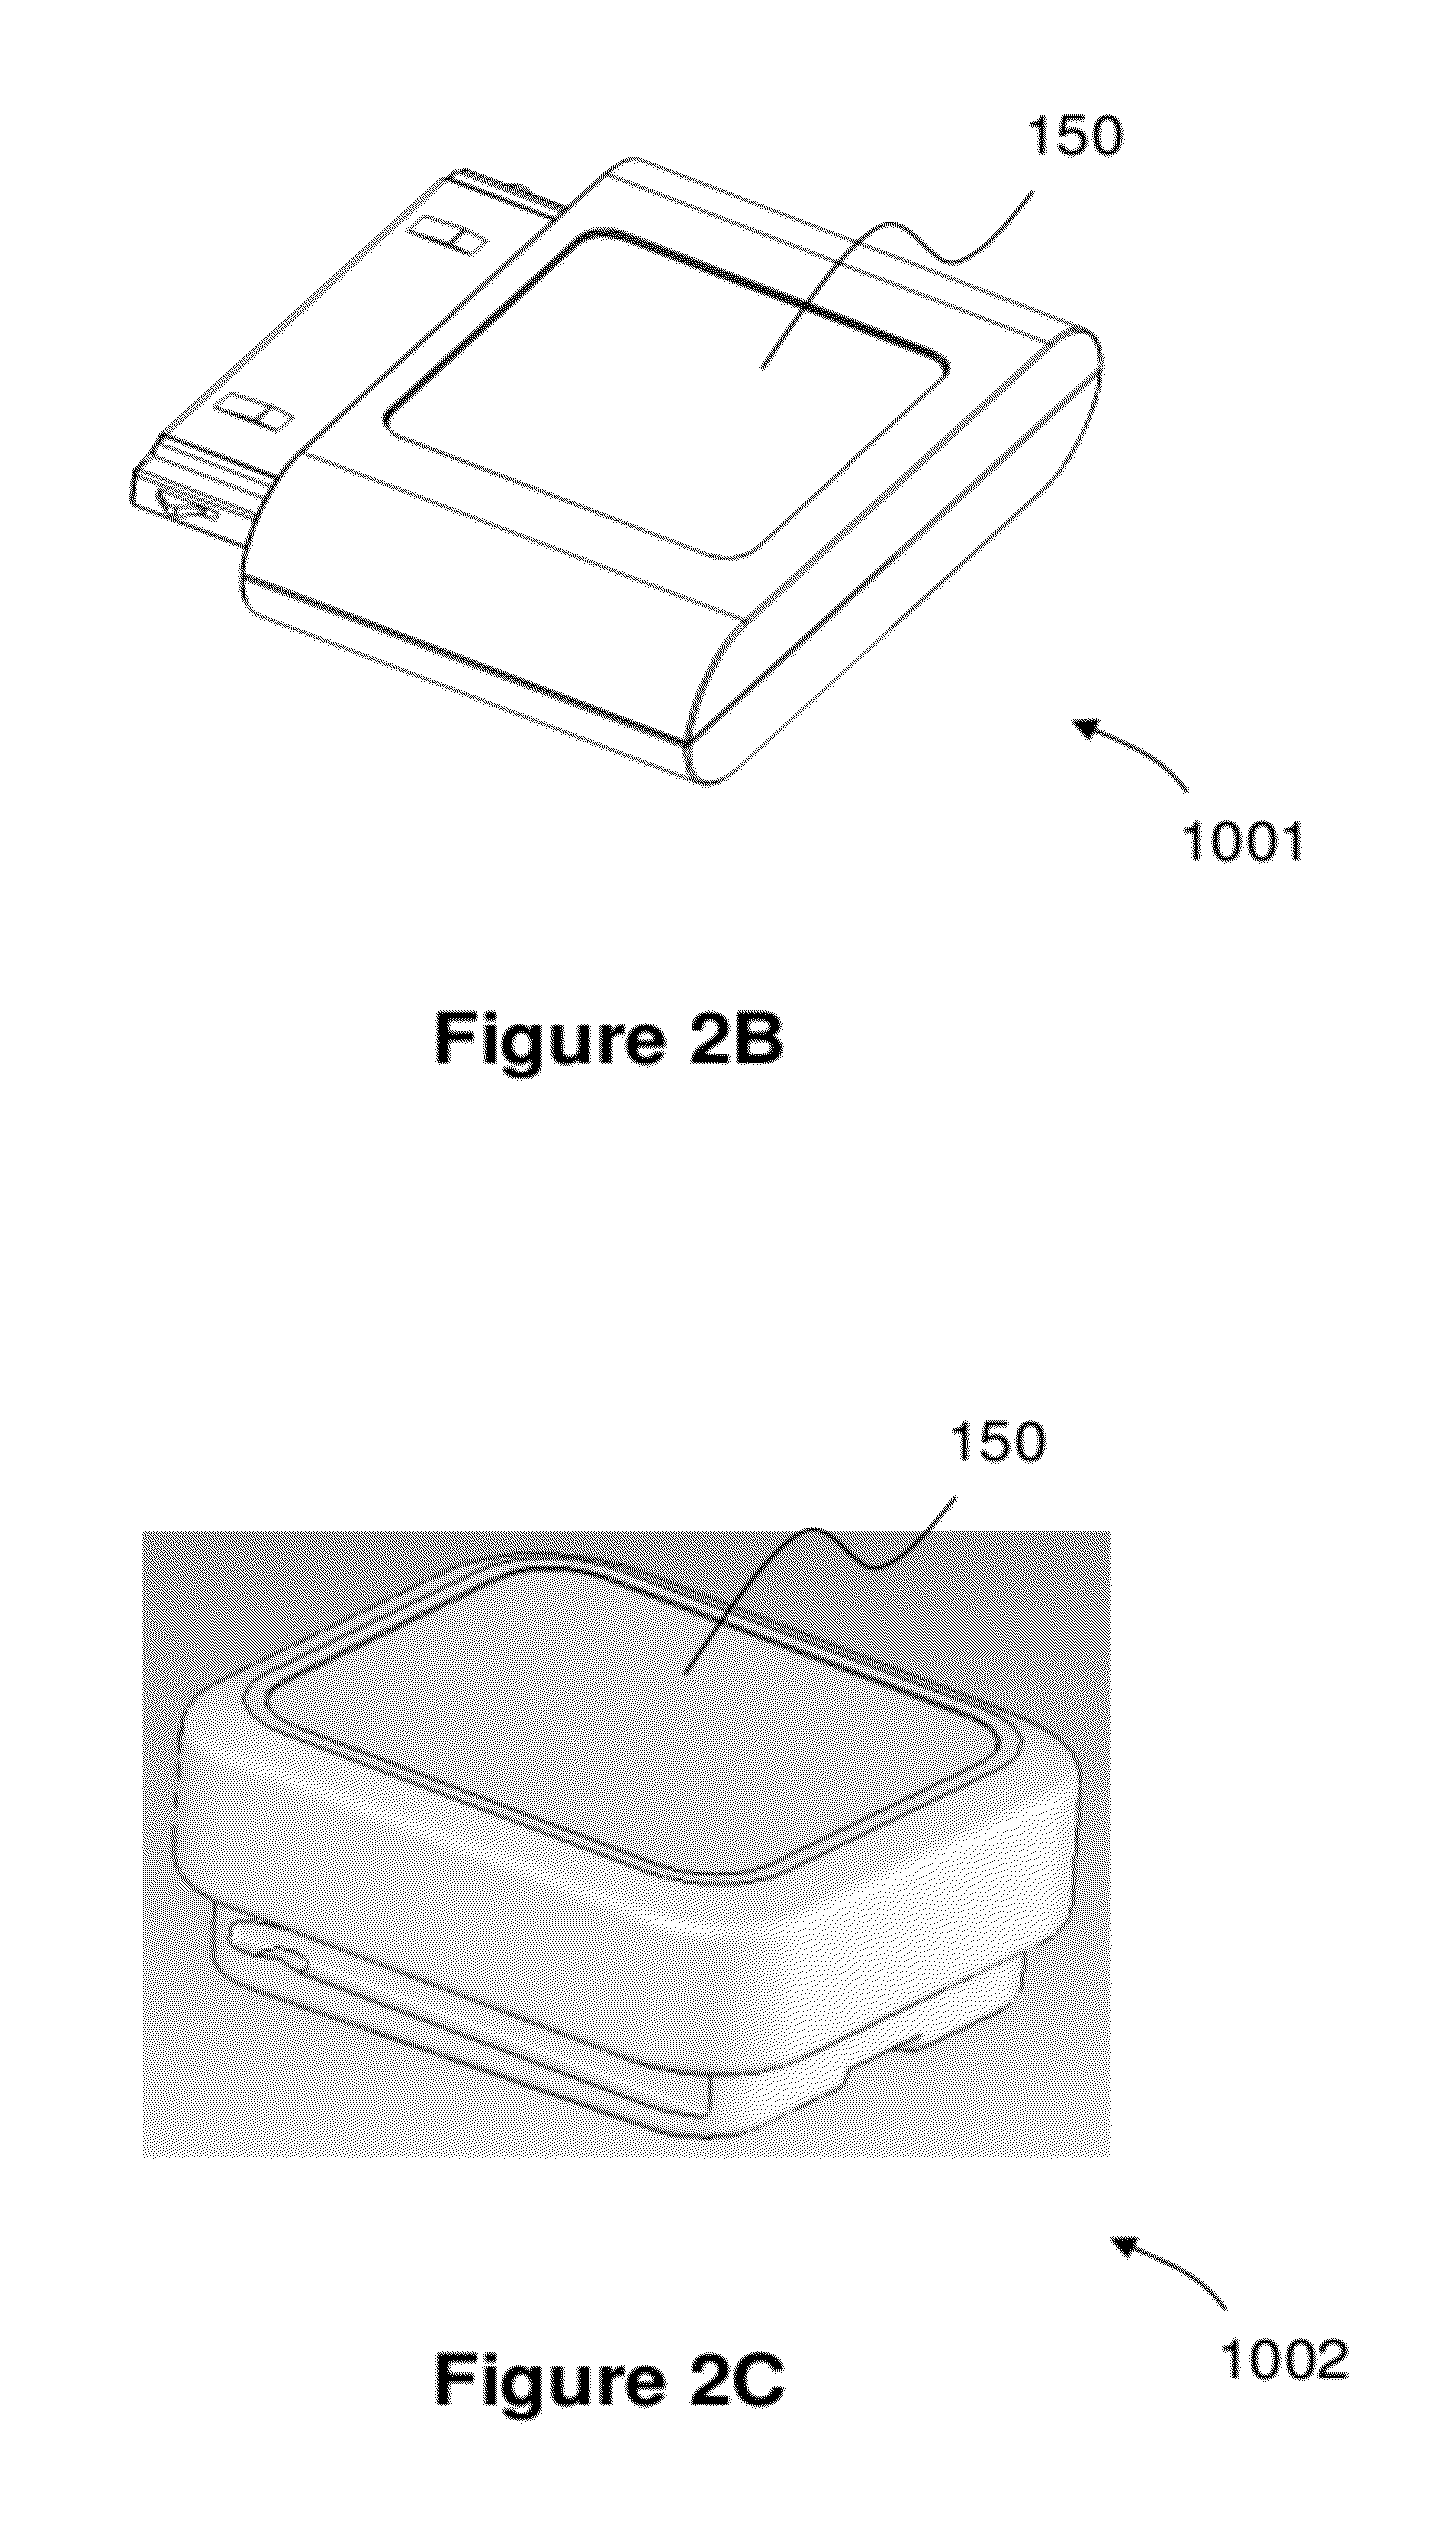 Performance monitoring modules and apparatus